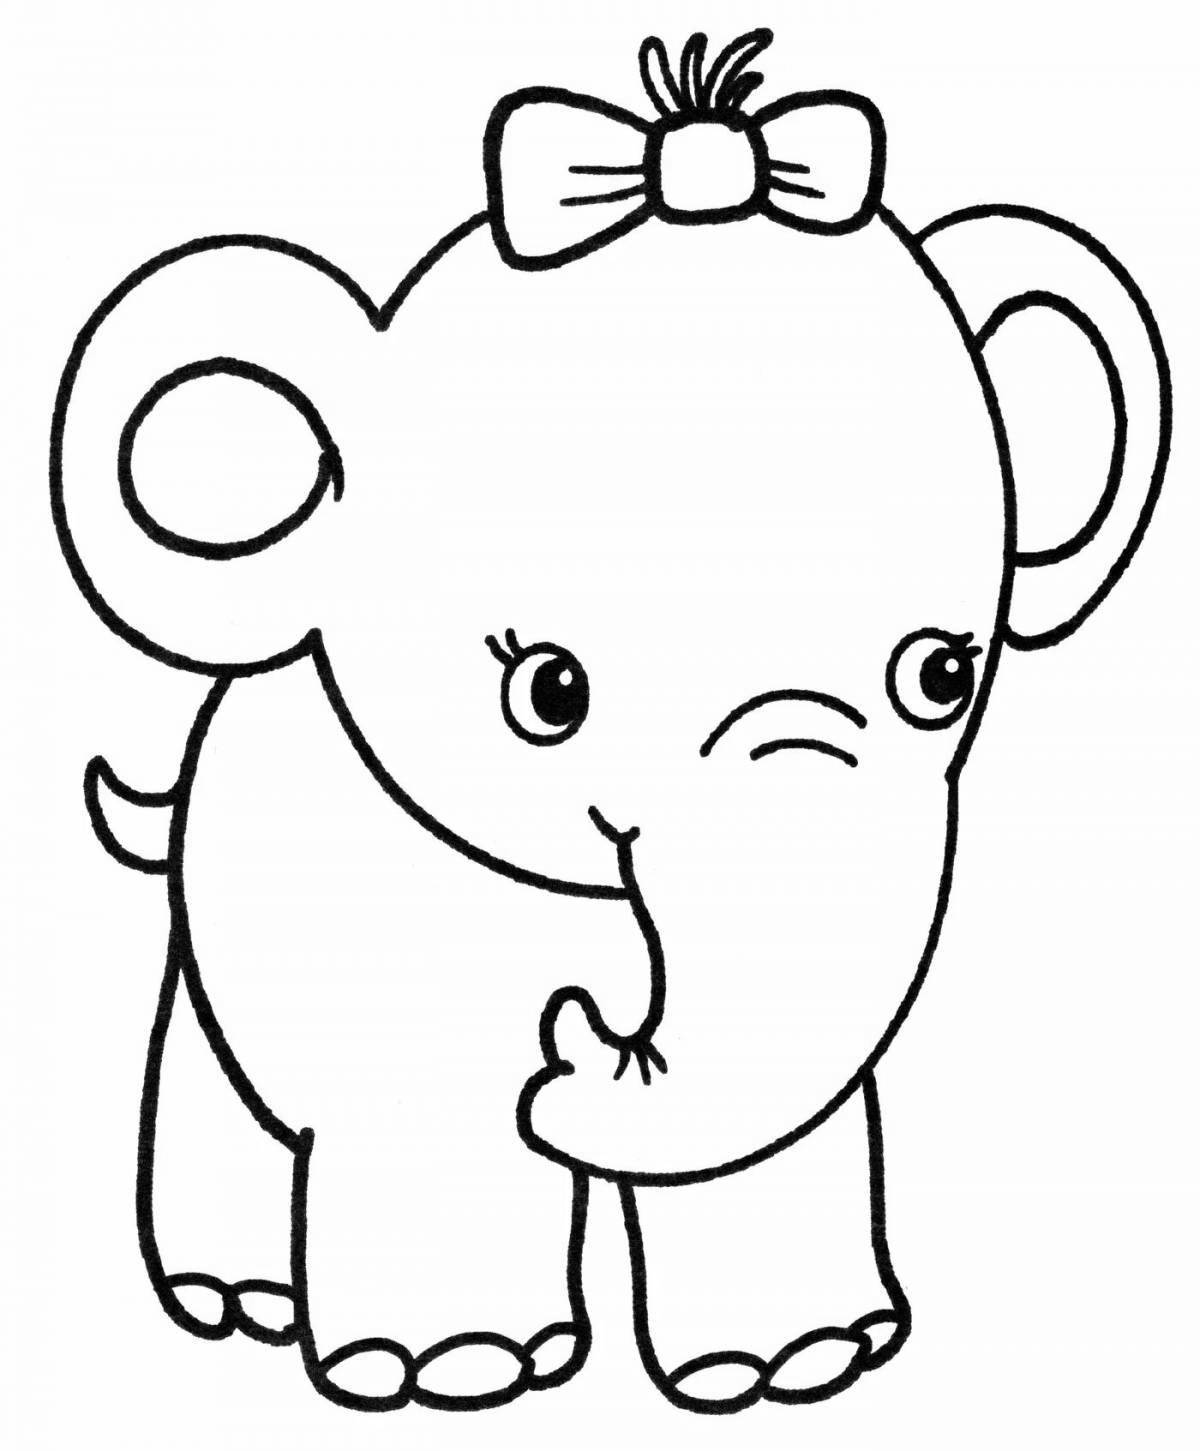 Cute elephant coloring book for 7 year olds